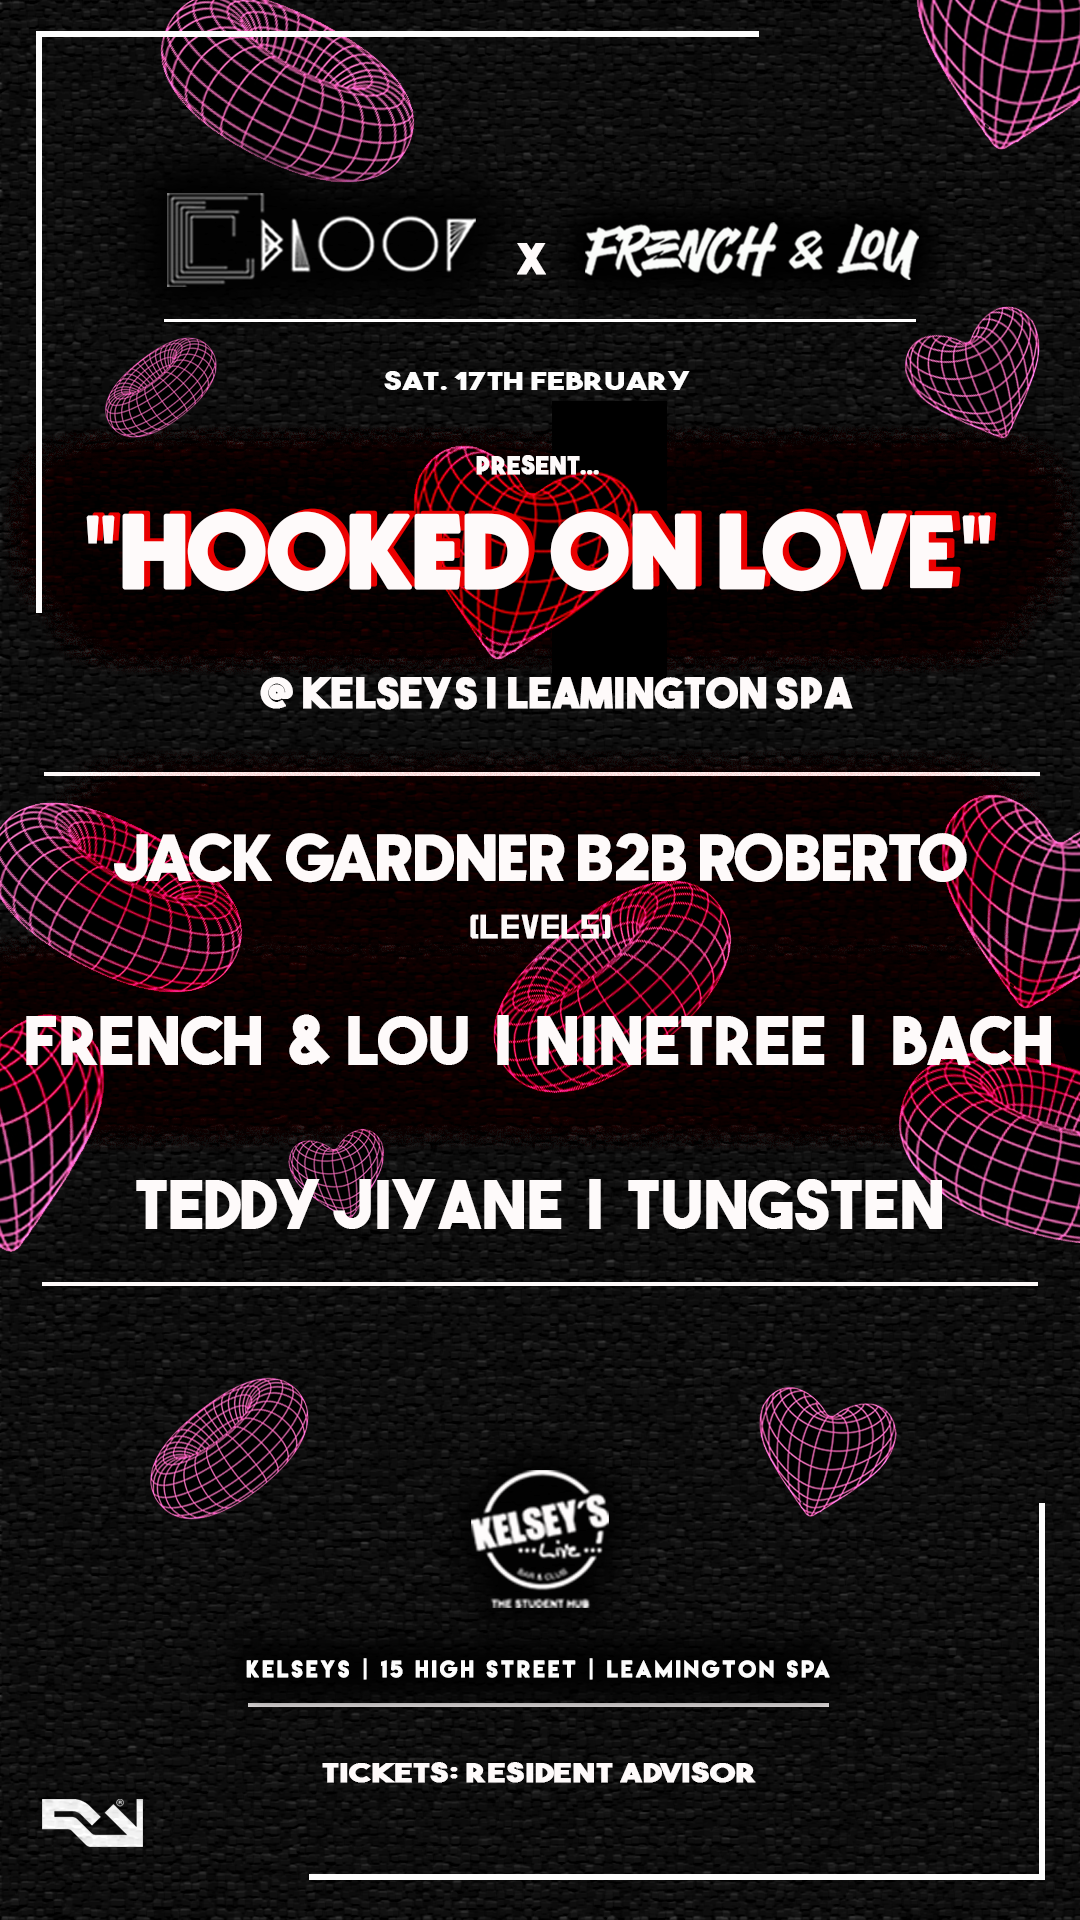 Bloop X French & Lou: Hooked On Love - フライヤー表